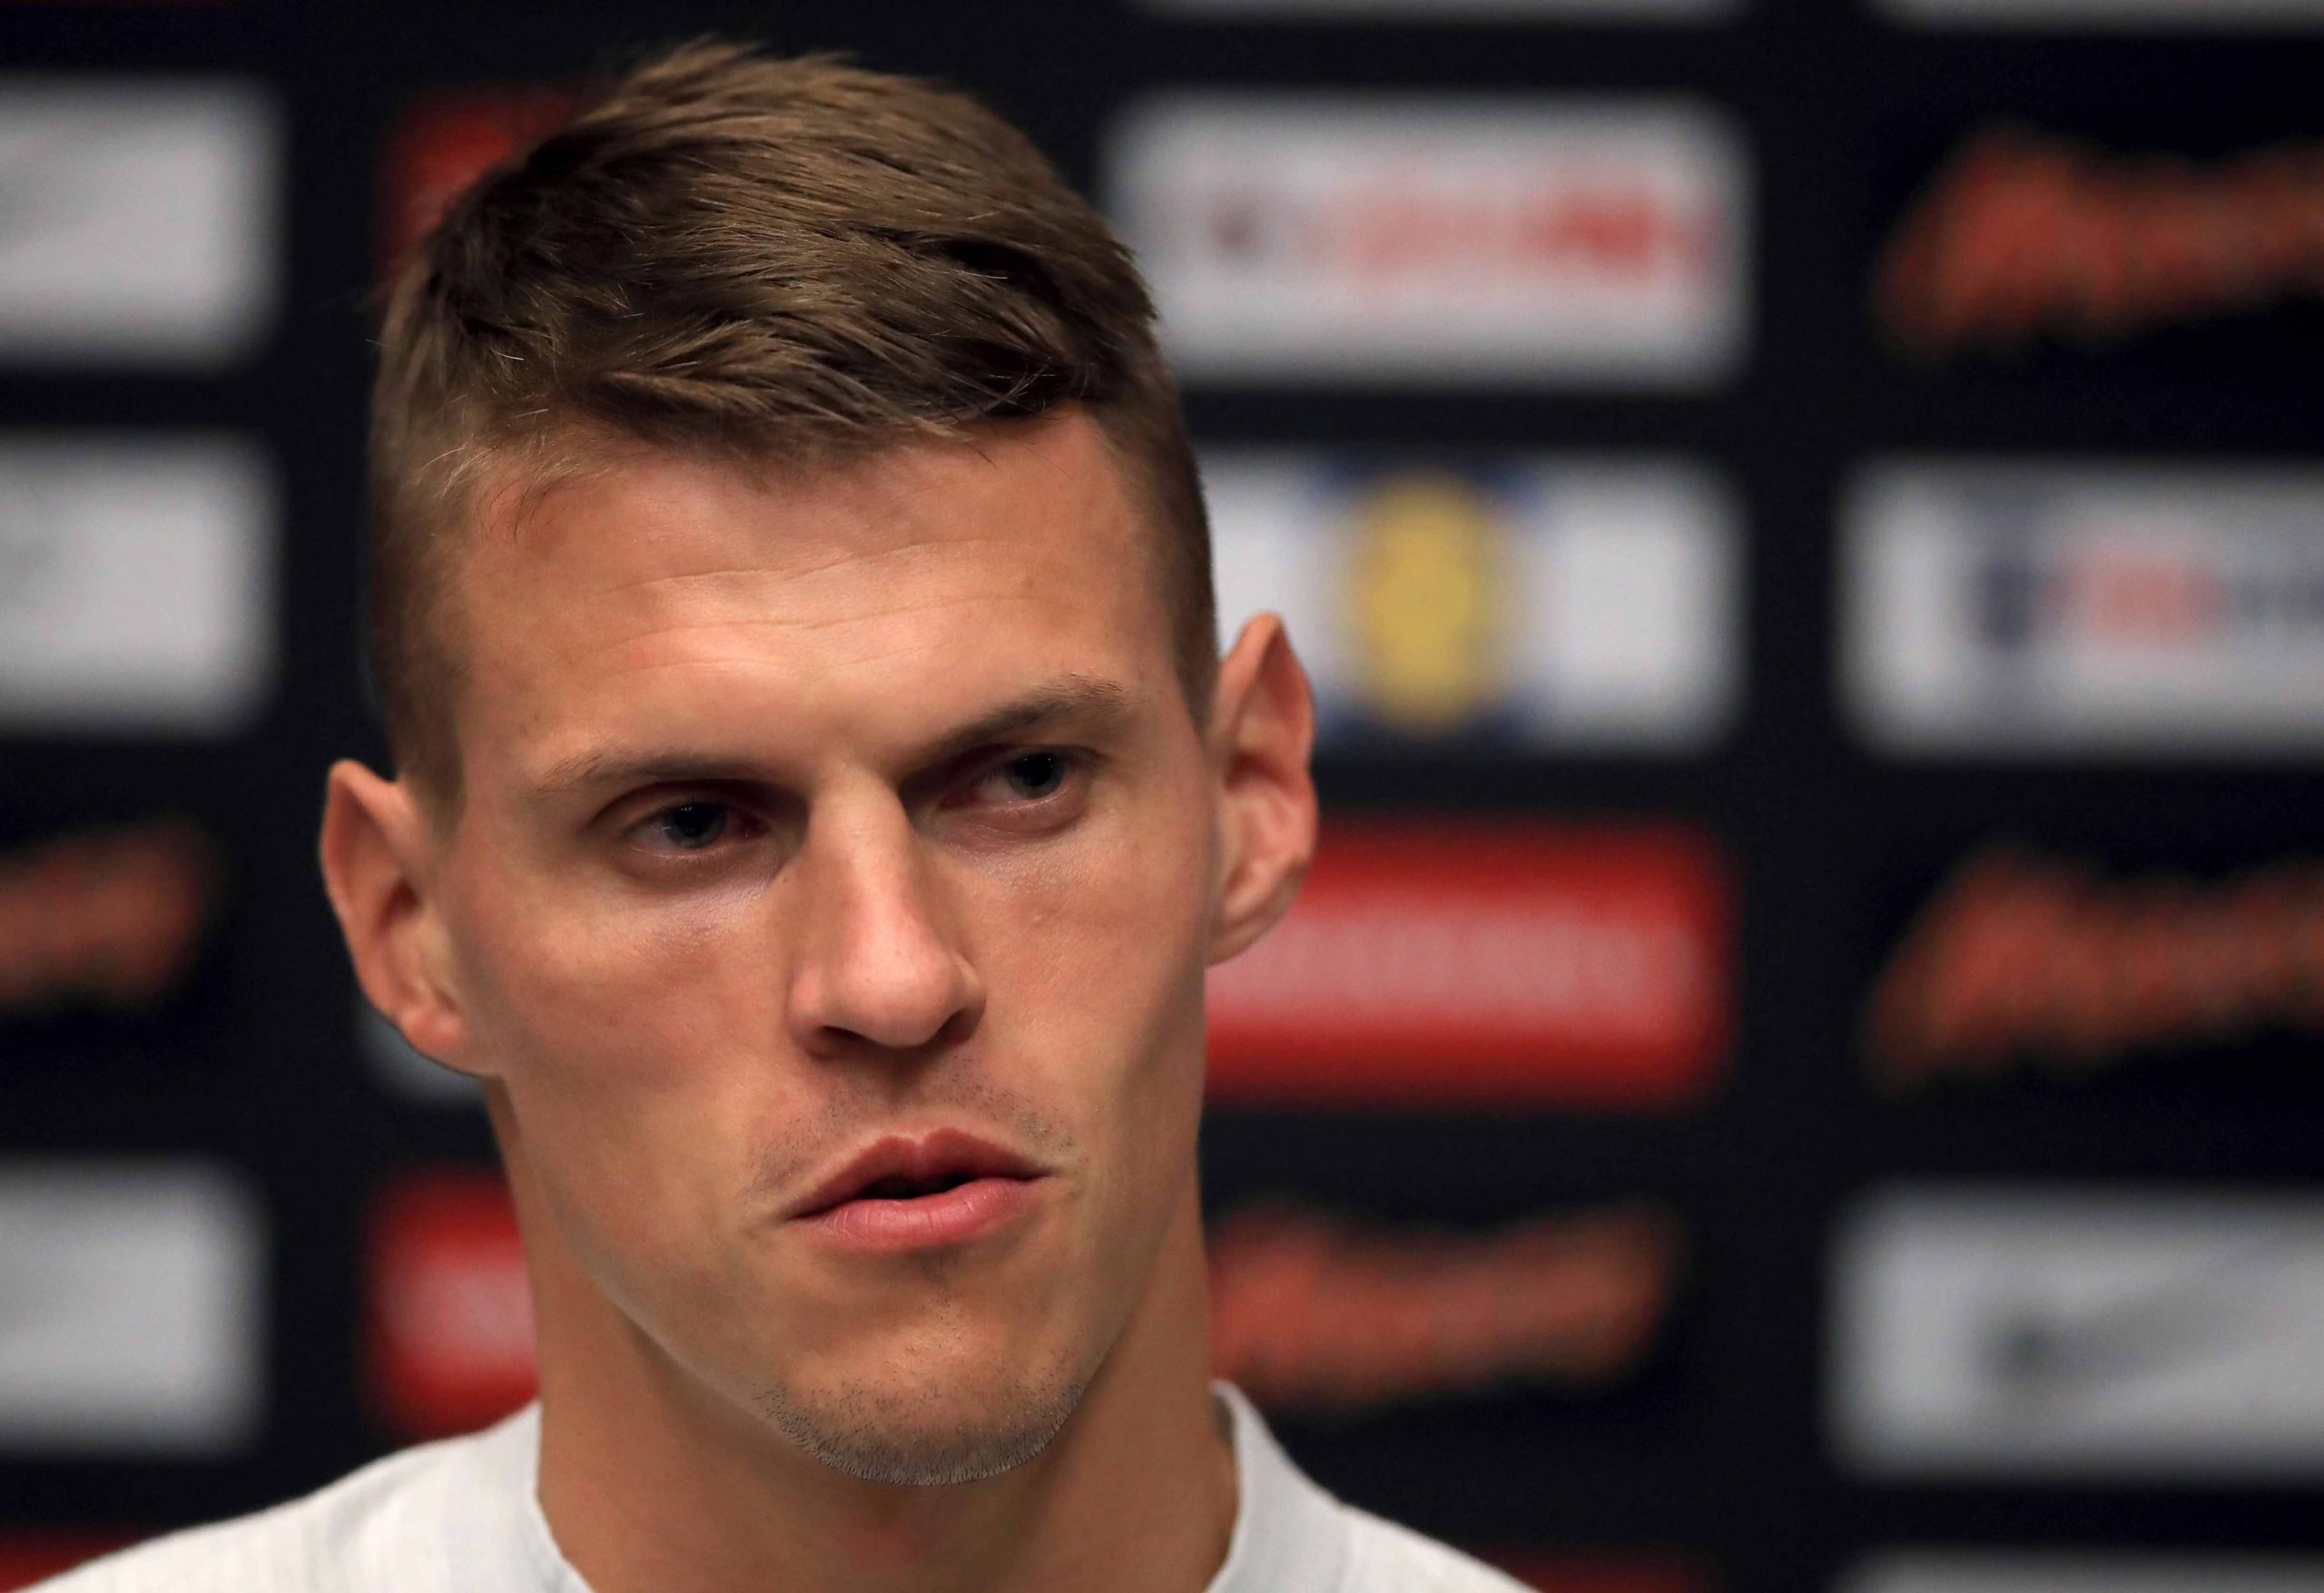 There is a chance -- Martin Skrtel on Liverpool making top 4